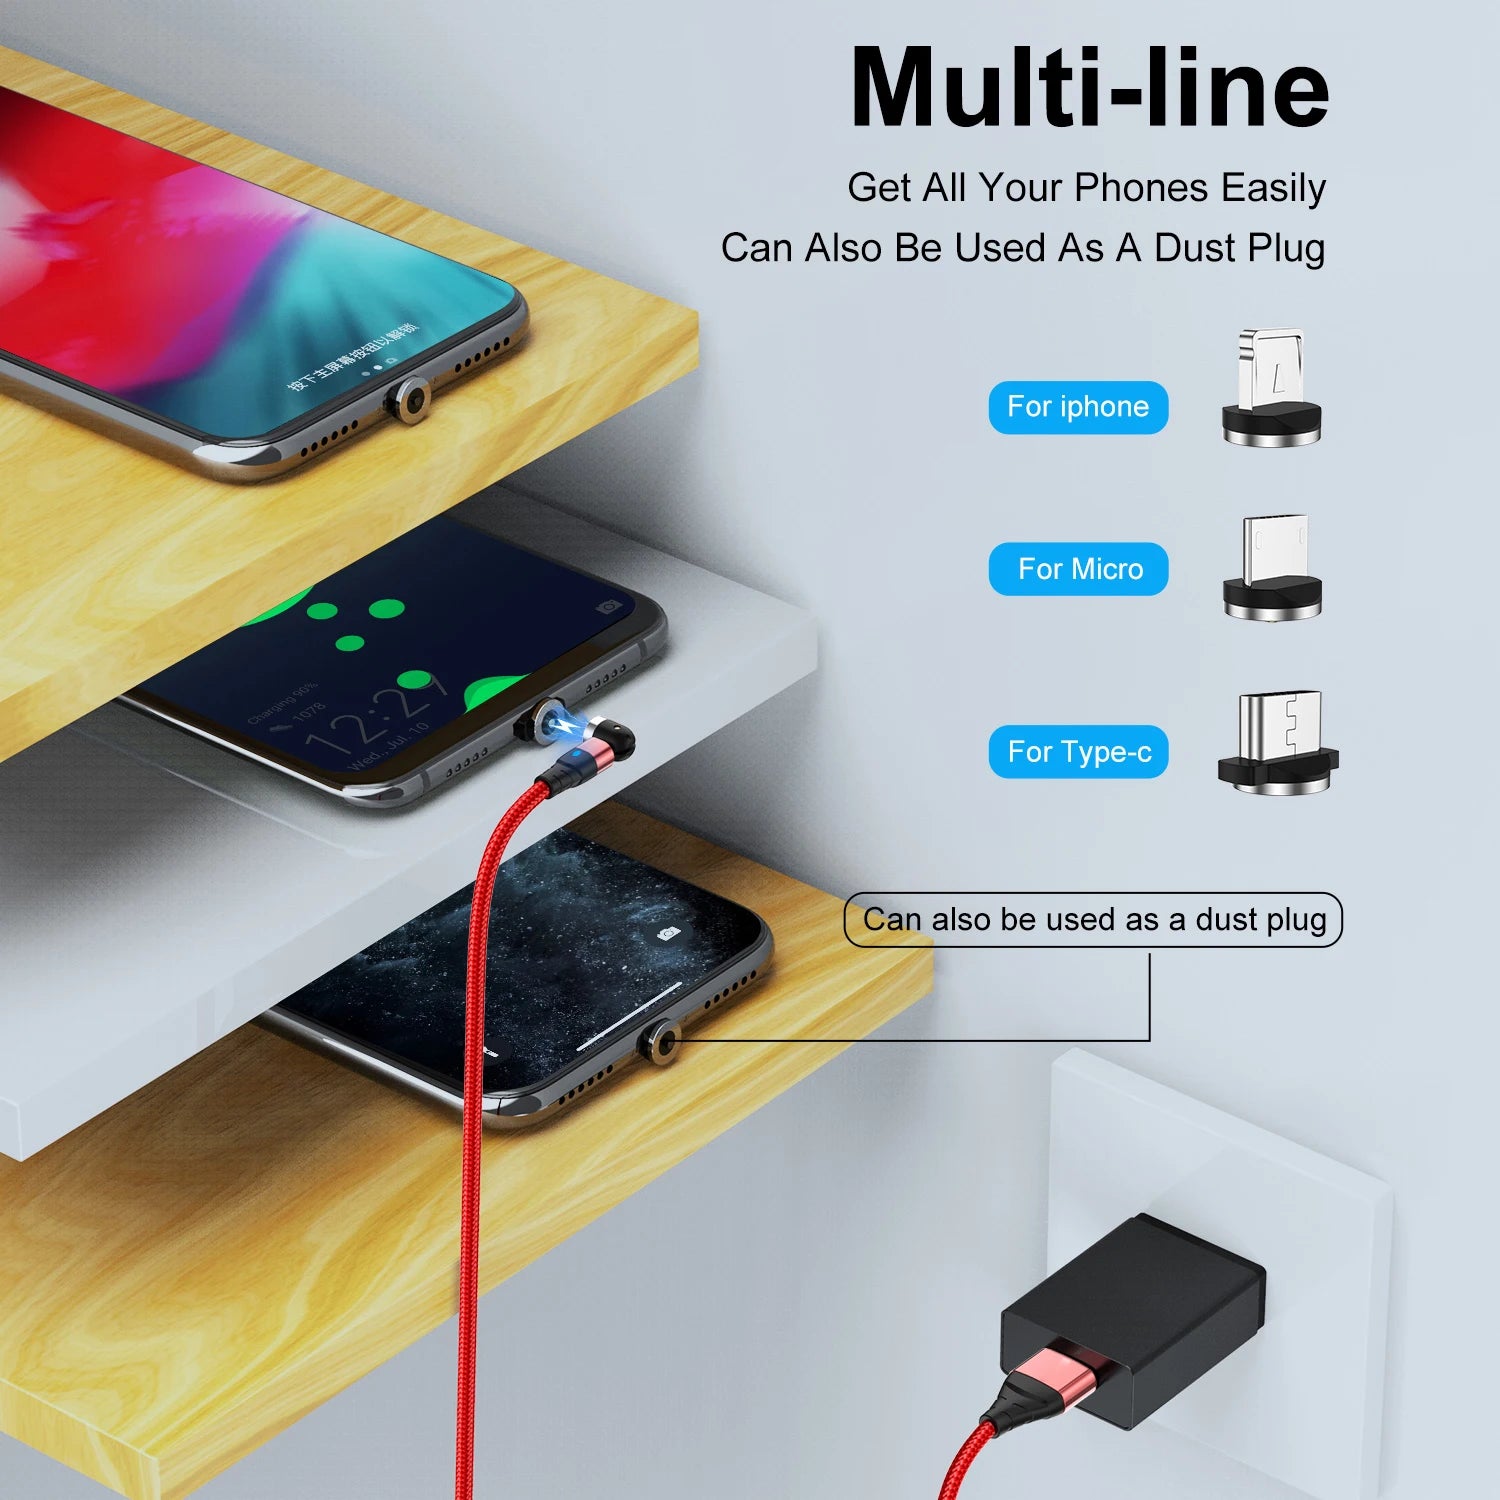 540° Rotation Magnetic Cable: Type C Micro Fast Charge Magnet USB-C Phone Charger for iPhone 14/11, Huawei, Xiaomi, Samsung - Tangle-Free Wire Cord